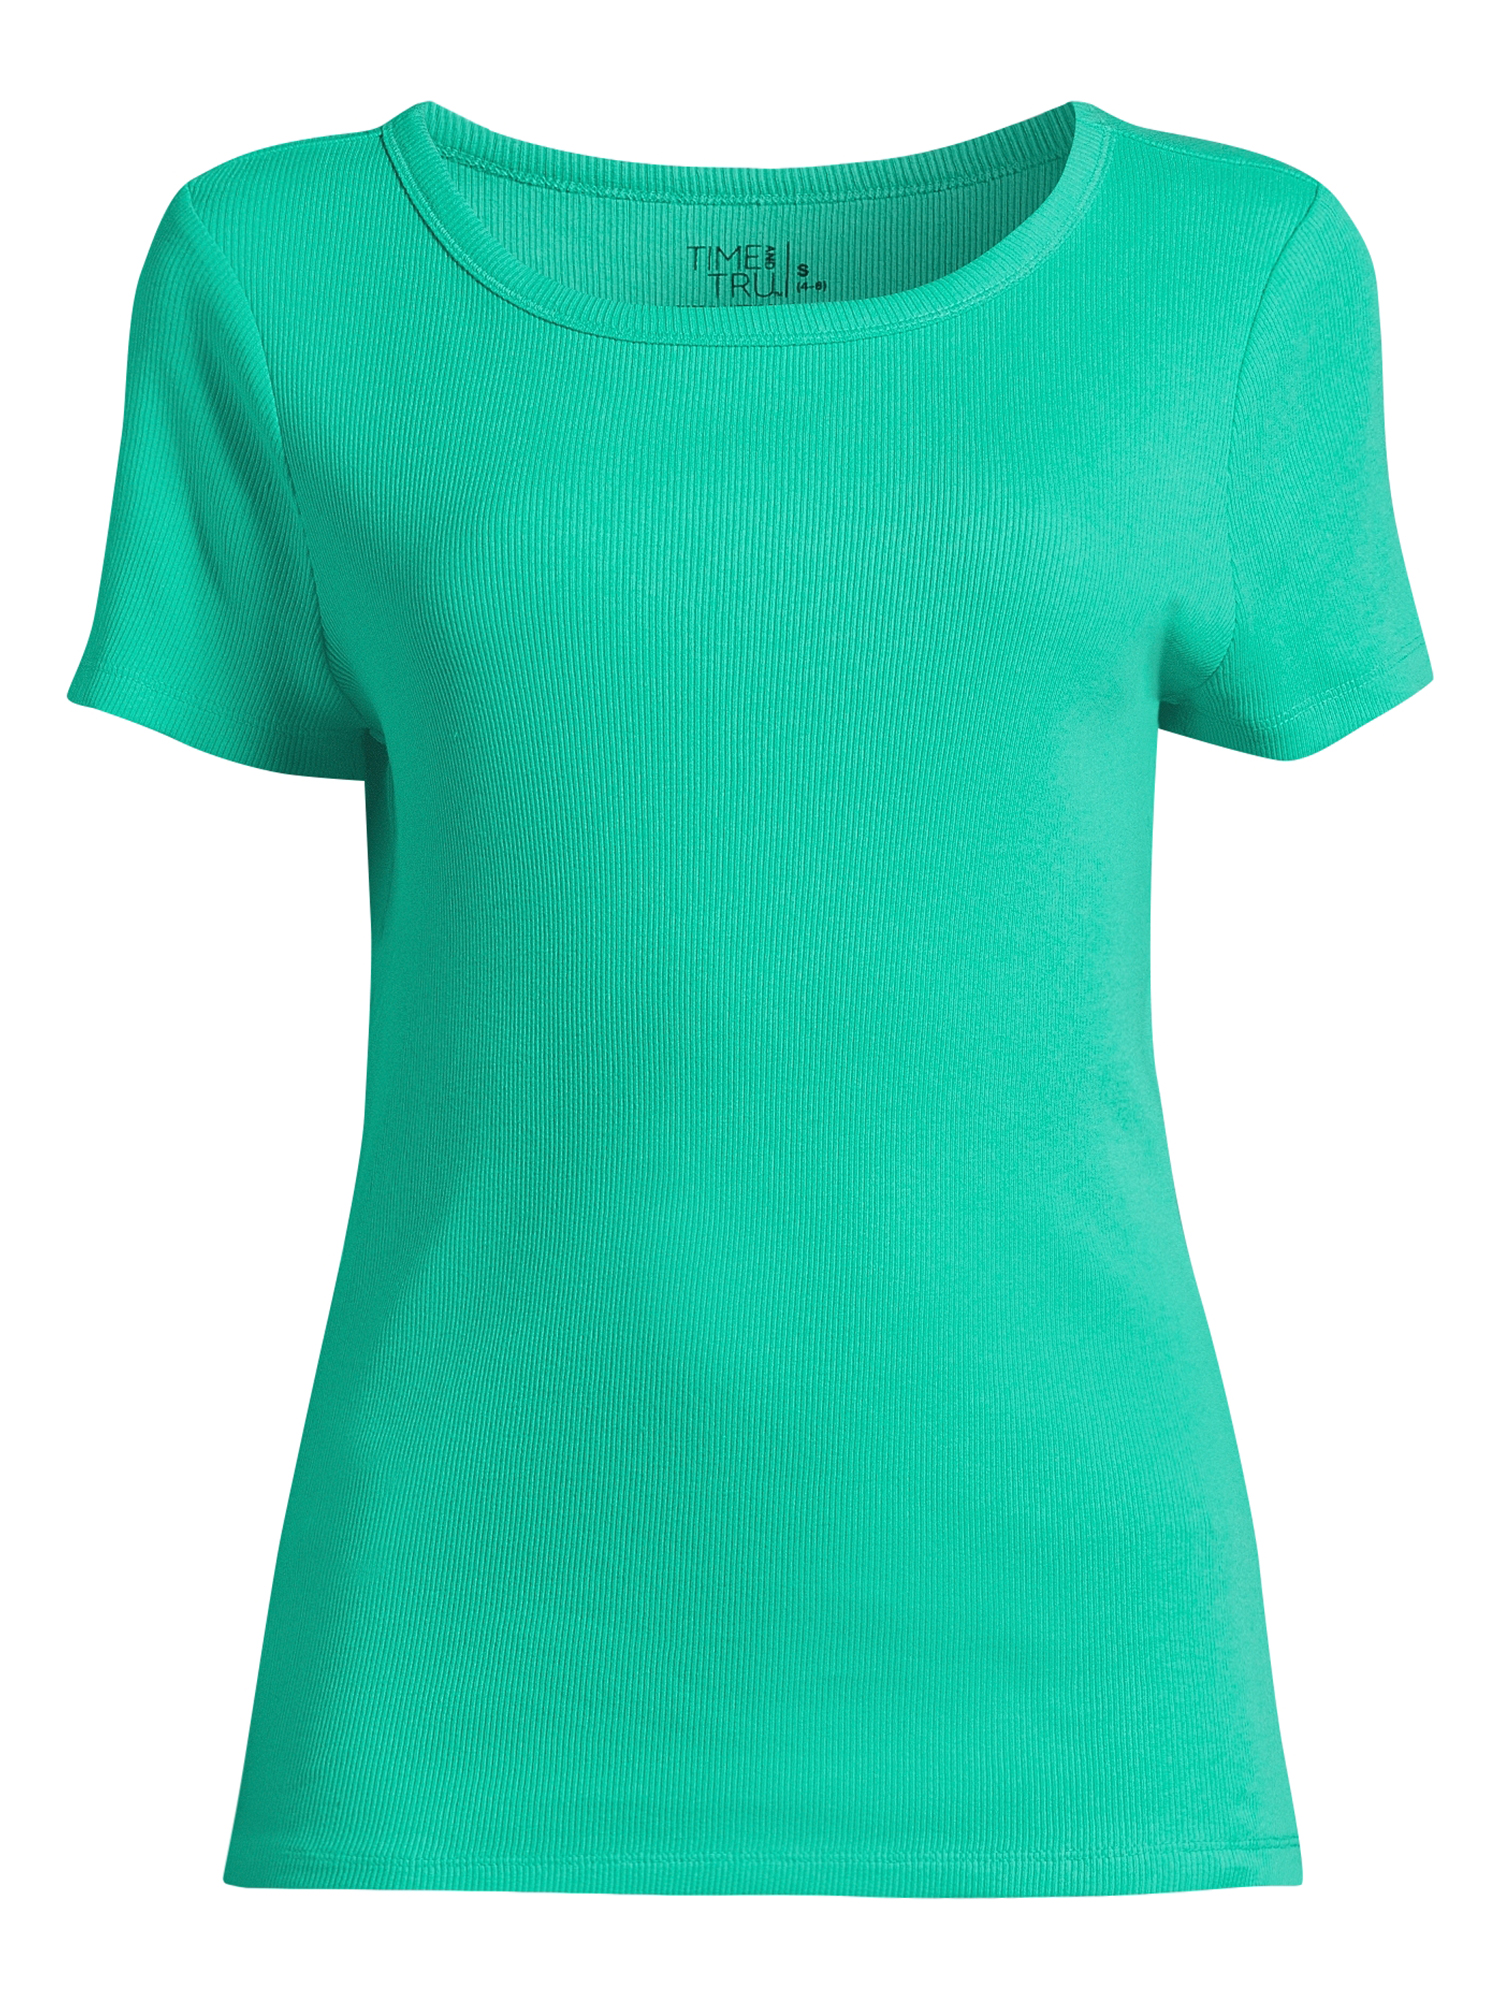 Time and Tru Women’s Rib Tee with Short Sleeves, Available in 1-Pack, Sizes XS-XXXL - image 5 of 5